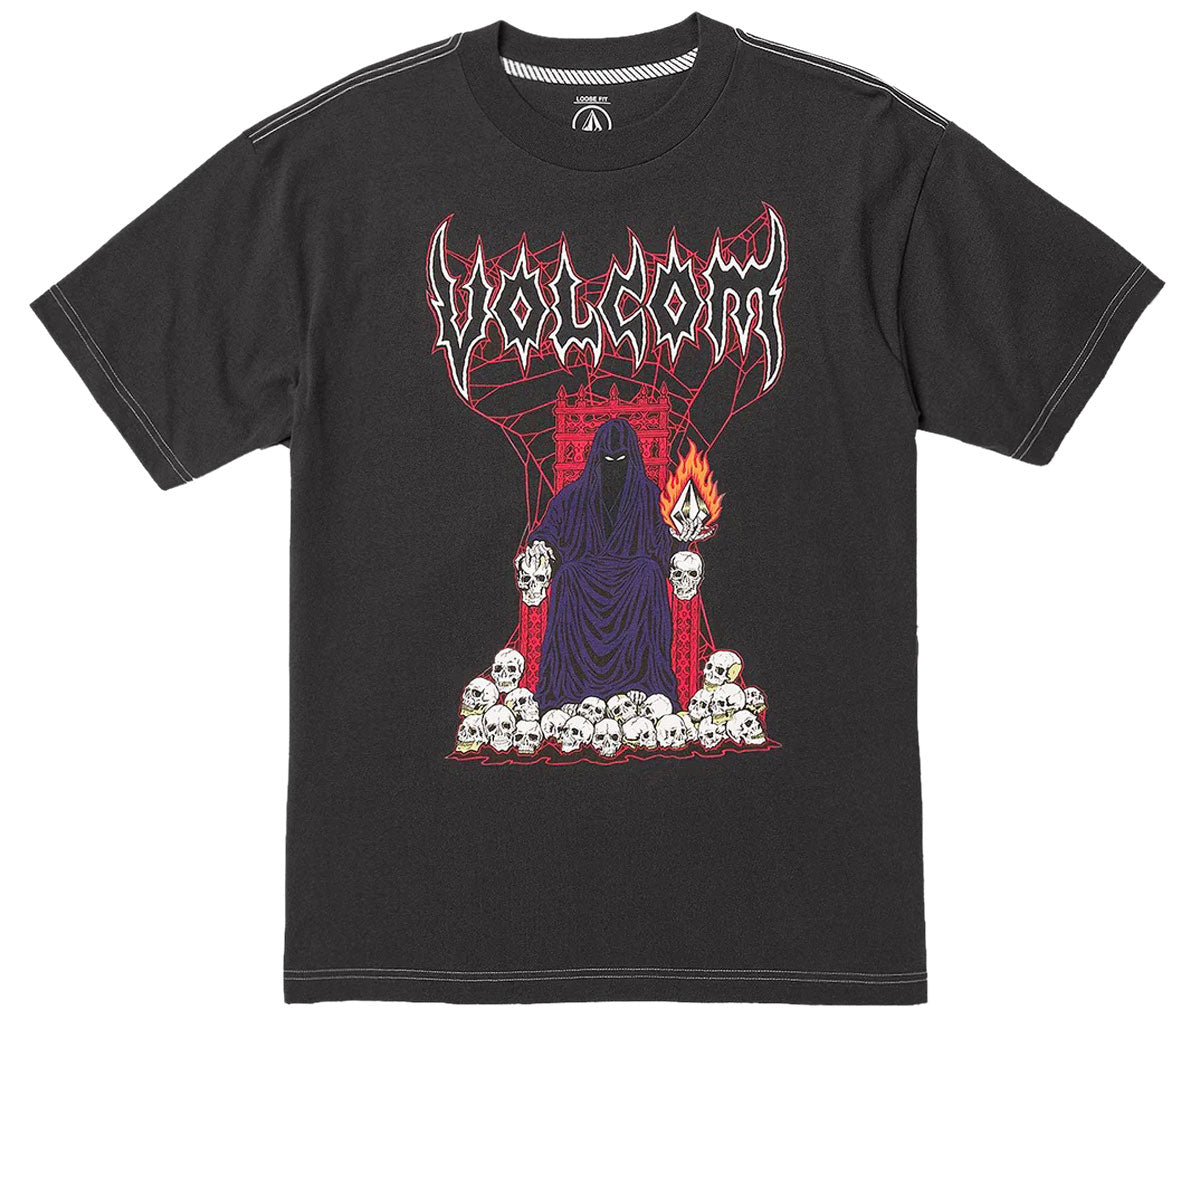 Volcom Stone Lord T-Shirt - Stealth image 1